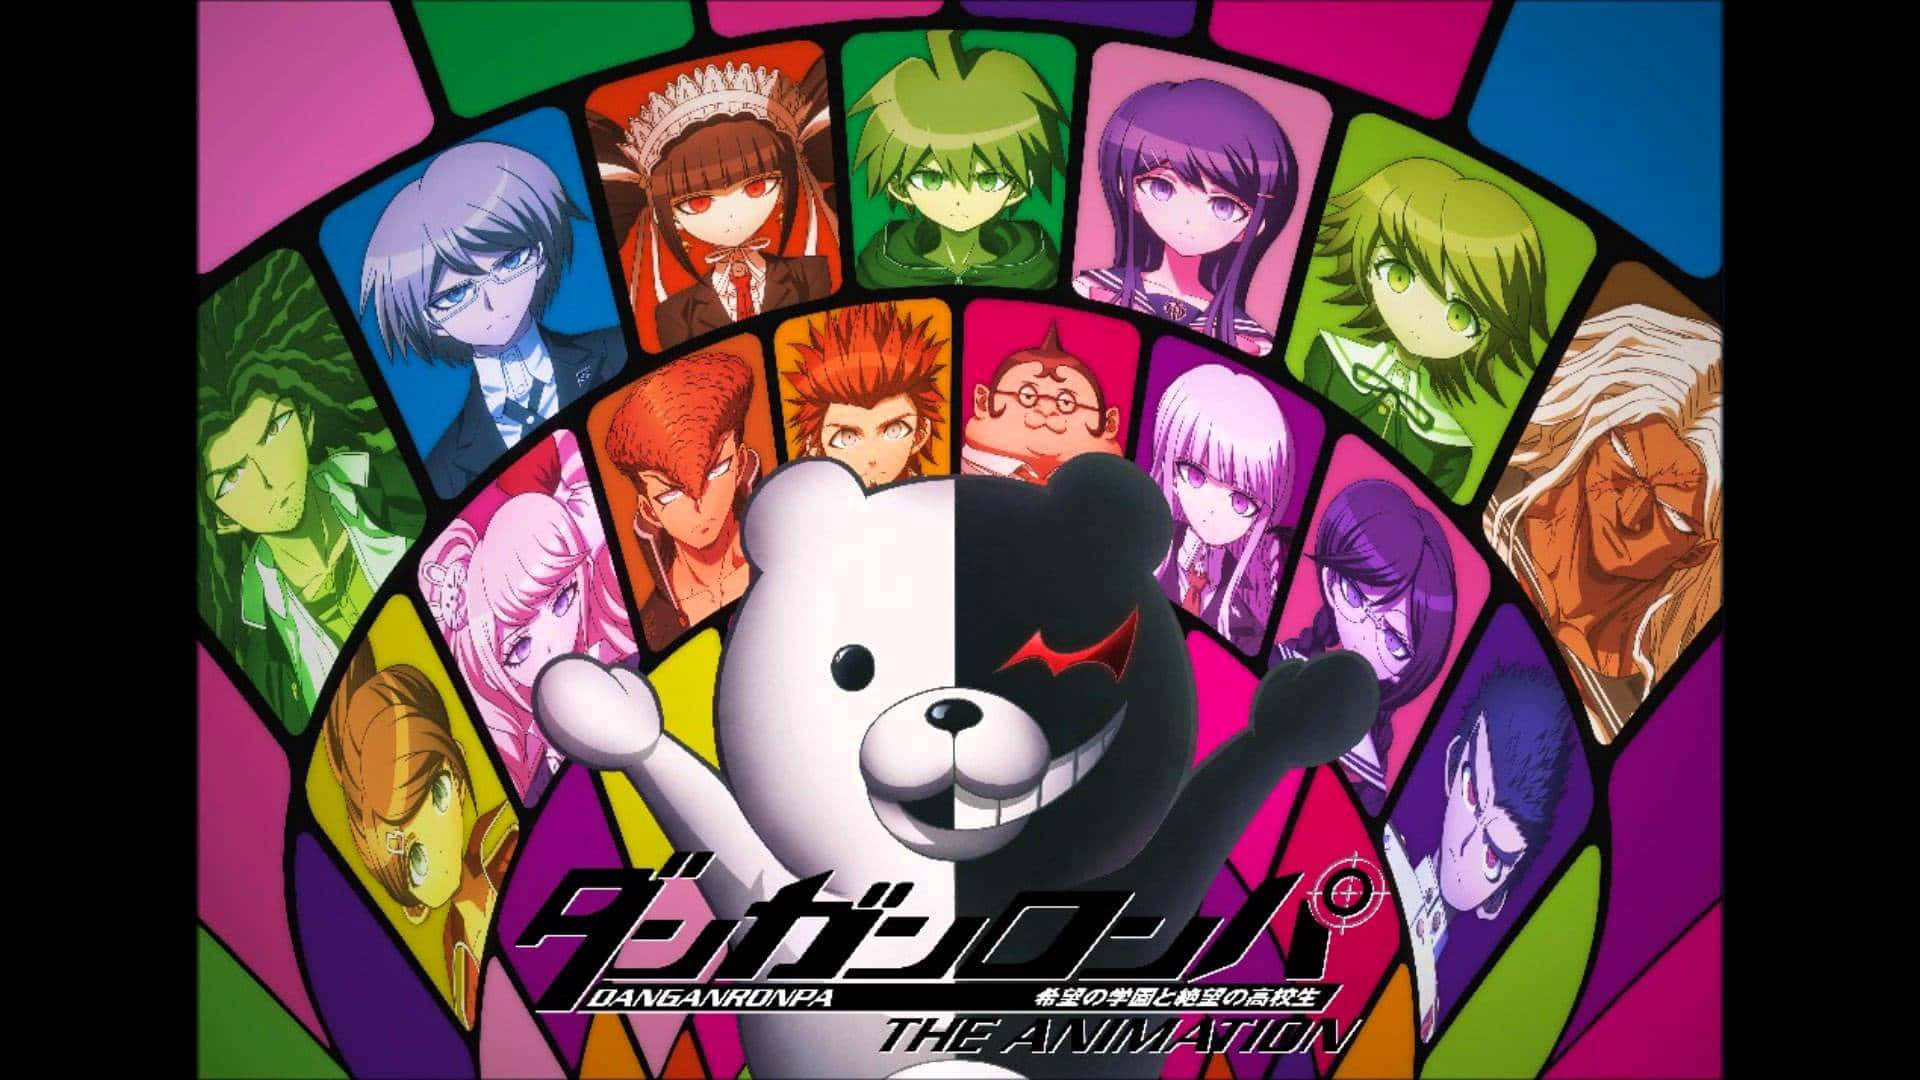 "Welcome to the Academy of Hope - Danganronpa"